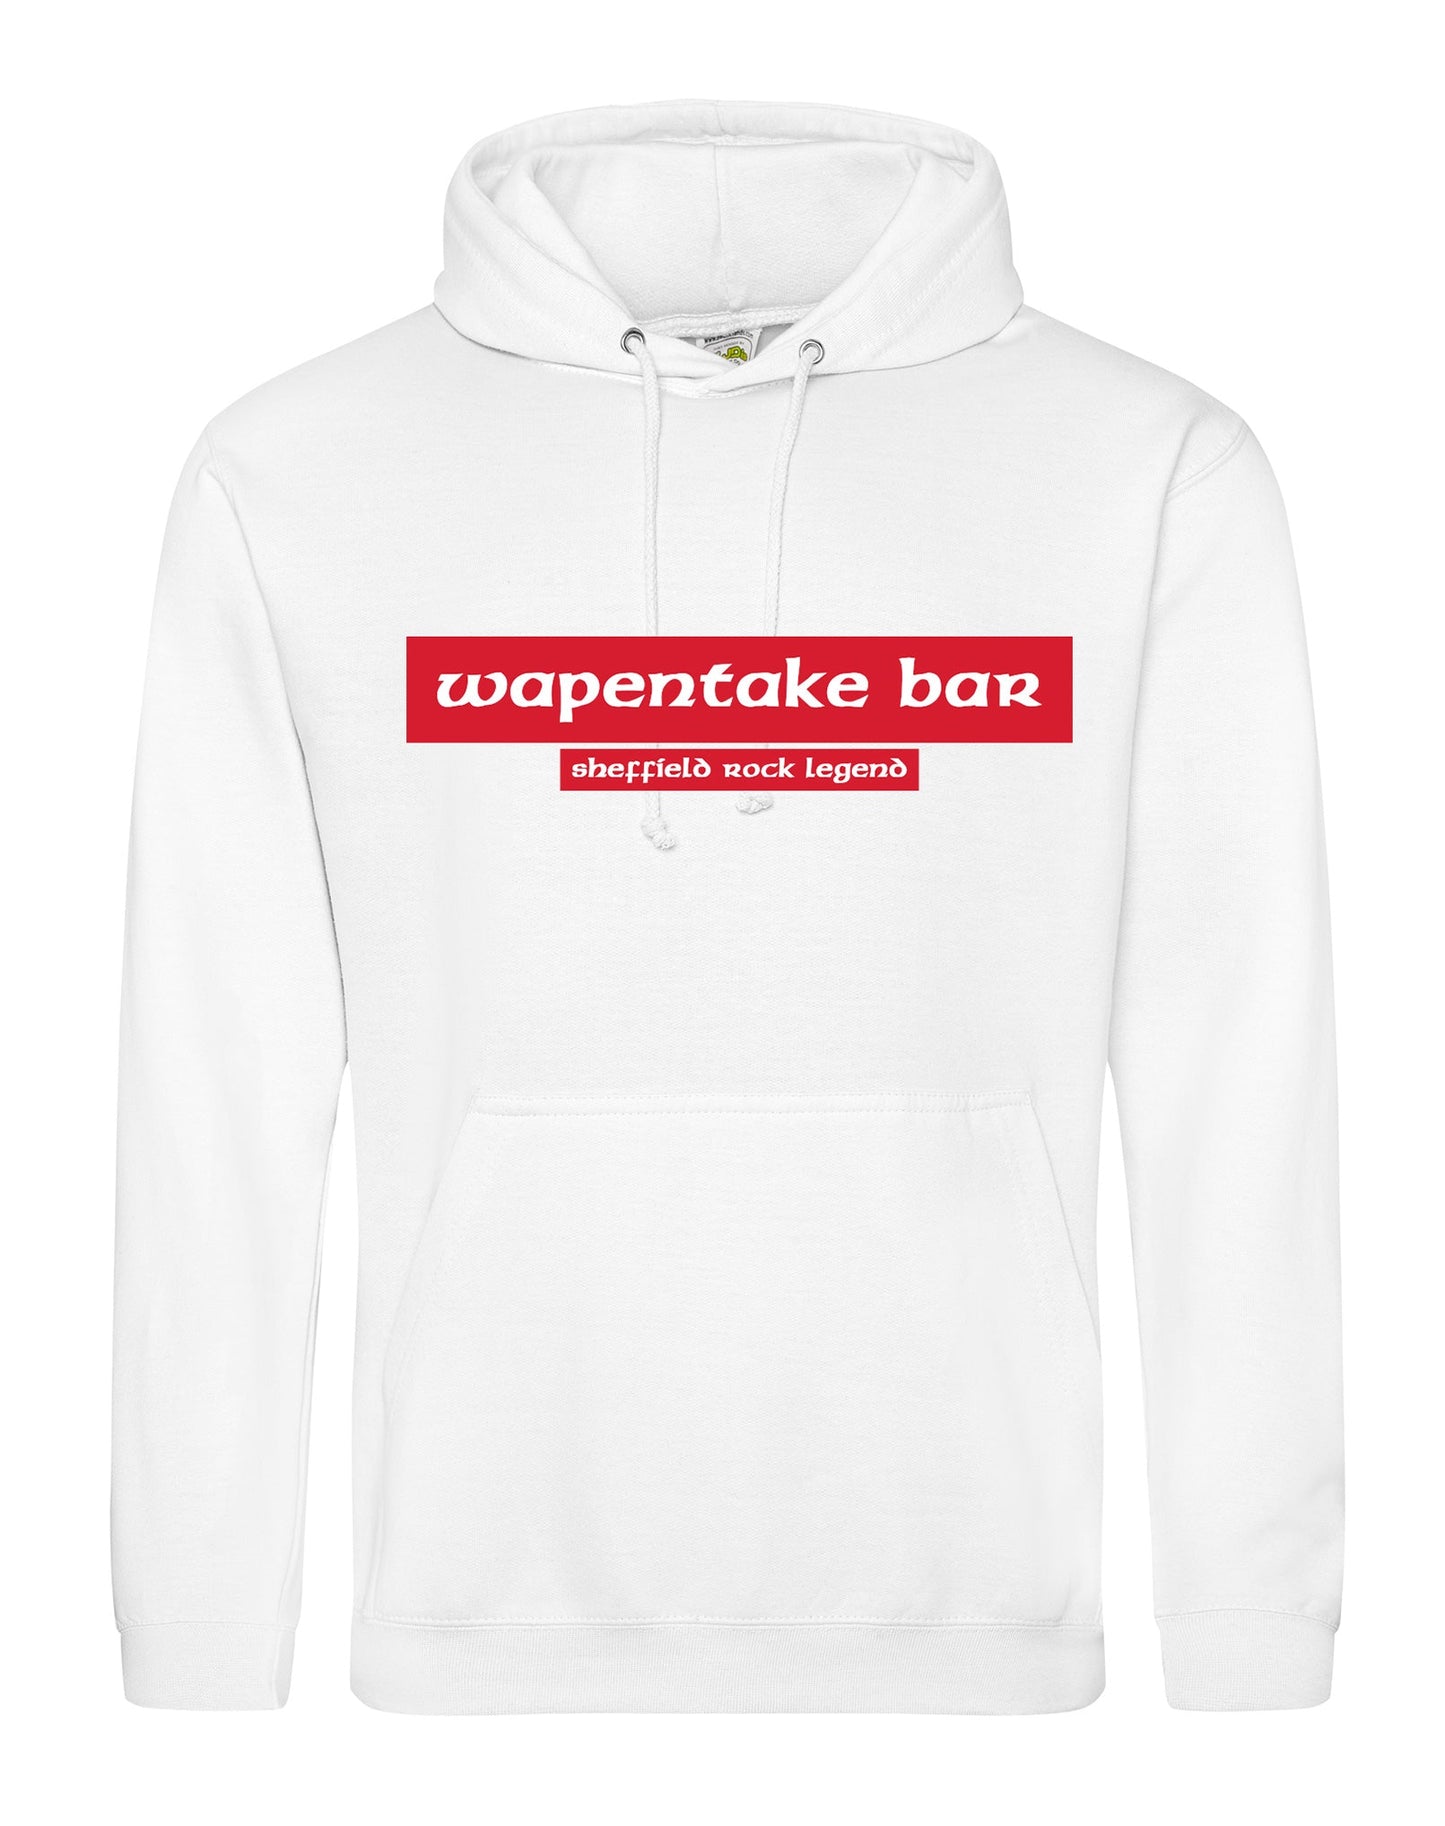 Wapentake (original logo) unisex fit hoodie - various colours - Dirty Stop Outs